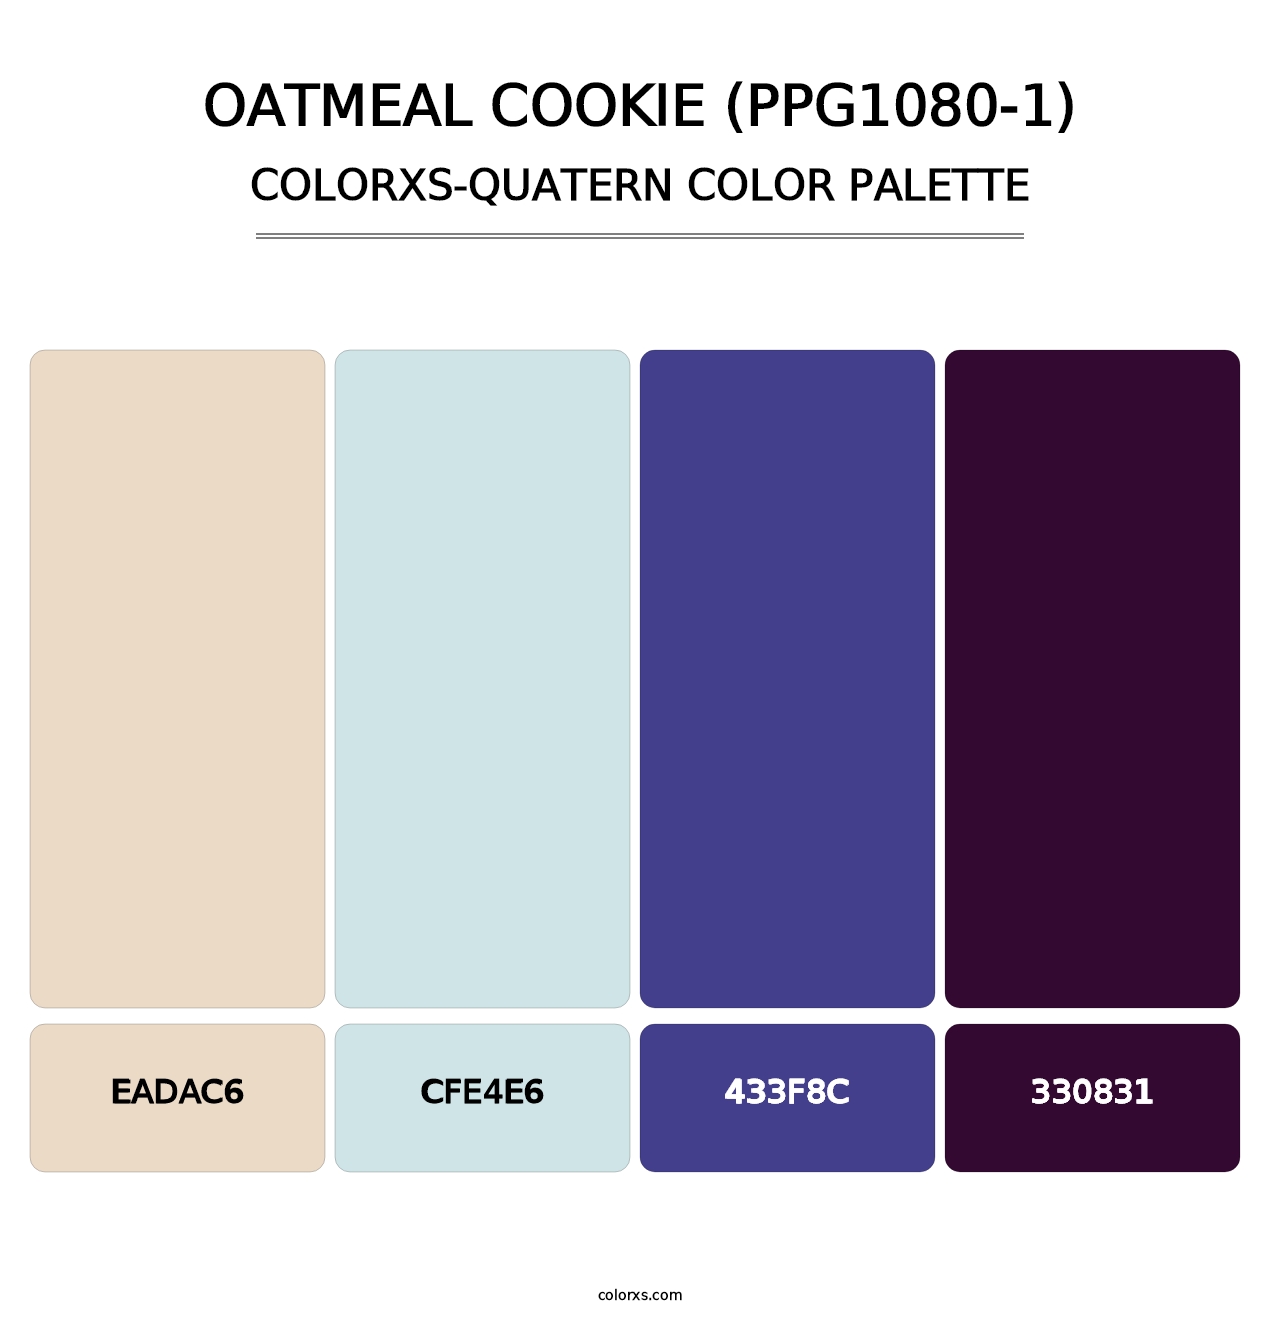 Oatmeal Cookie (PPG1080-1) - Colorxs Quatern Palette